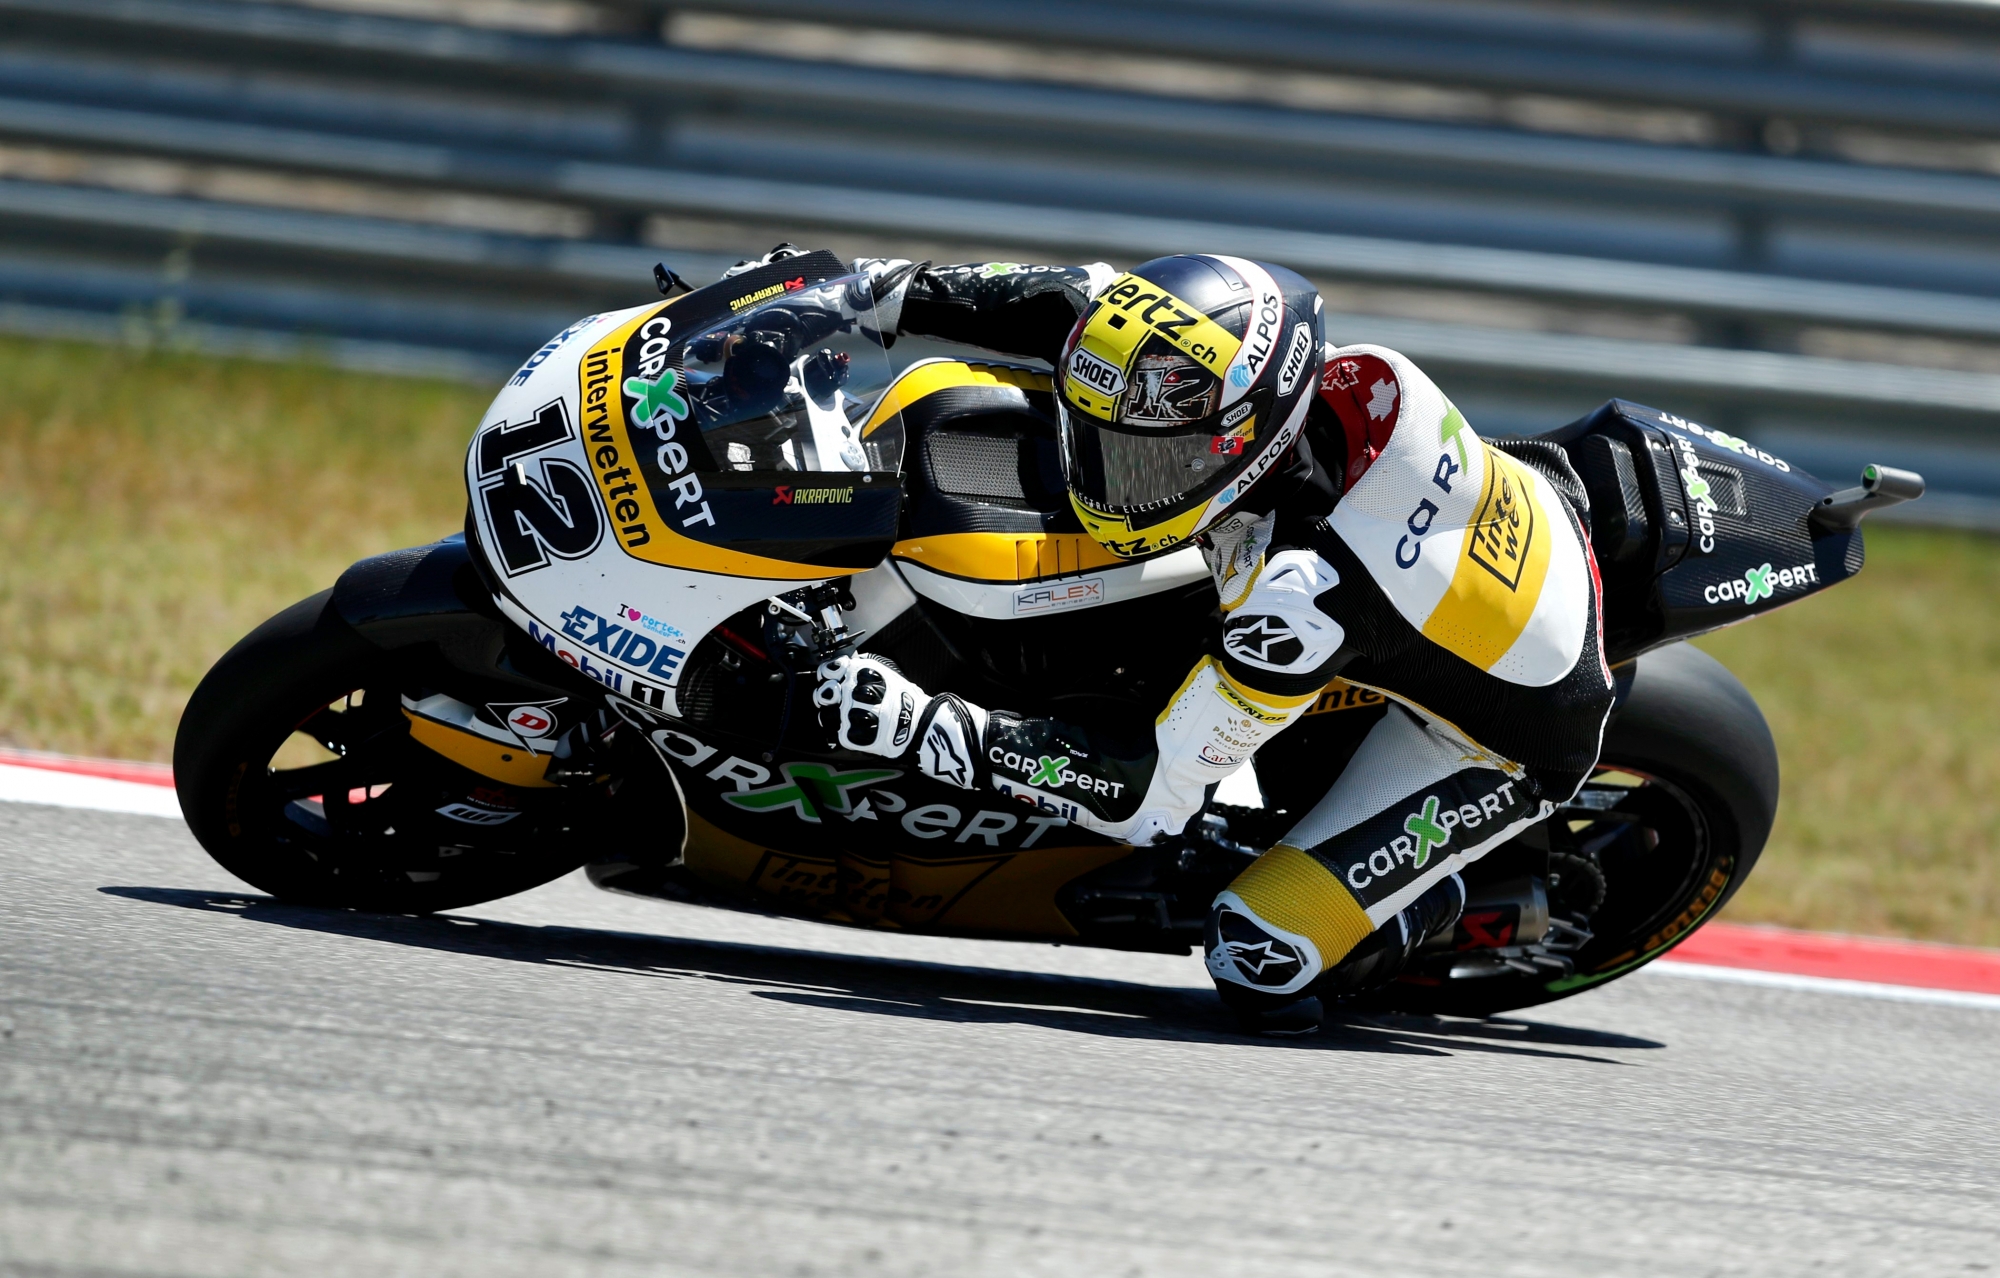 epa05924163 CarXpert Interwetten Team rider Thomas Luthi of Switzerland in action during the Moto 2 race at the Motorcycling Grand Prix of the Americas at Circuit of the Americas in Austin, Texas, USA 23 April 2017.  EPA/PAUL BUCK  EPA/PAUL BUCK USA MOTORCYCLING GRAND PRIX 2017